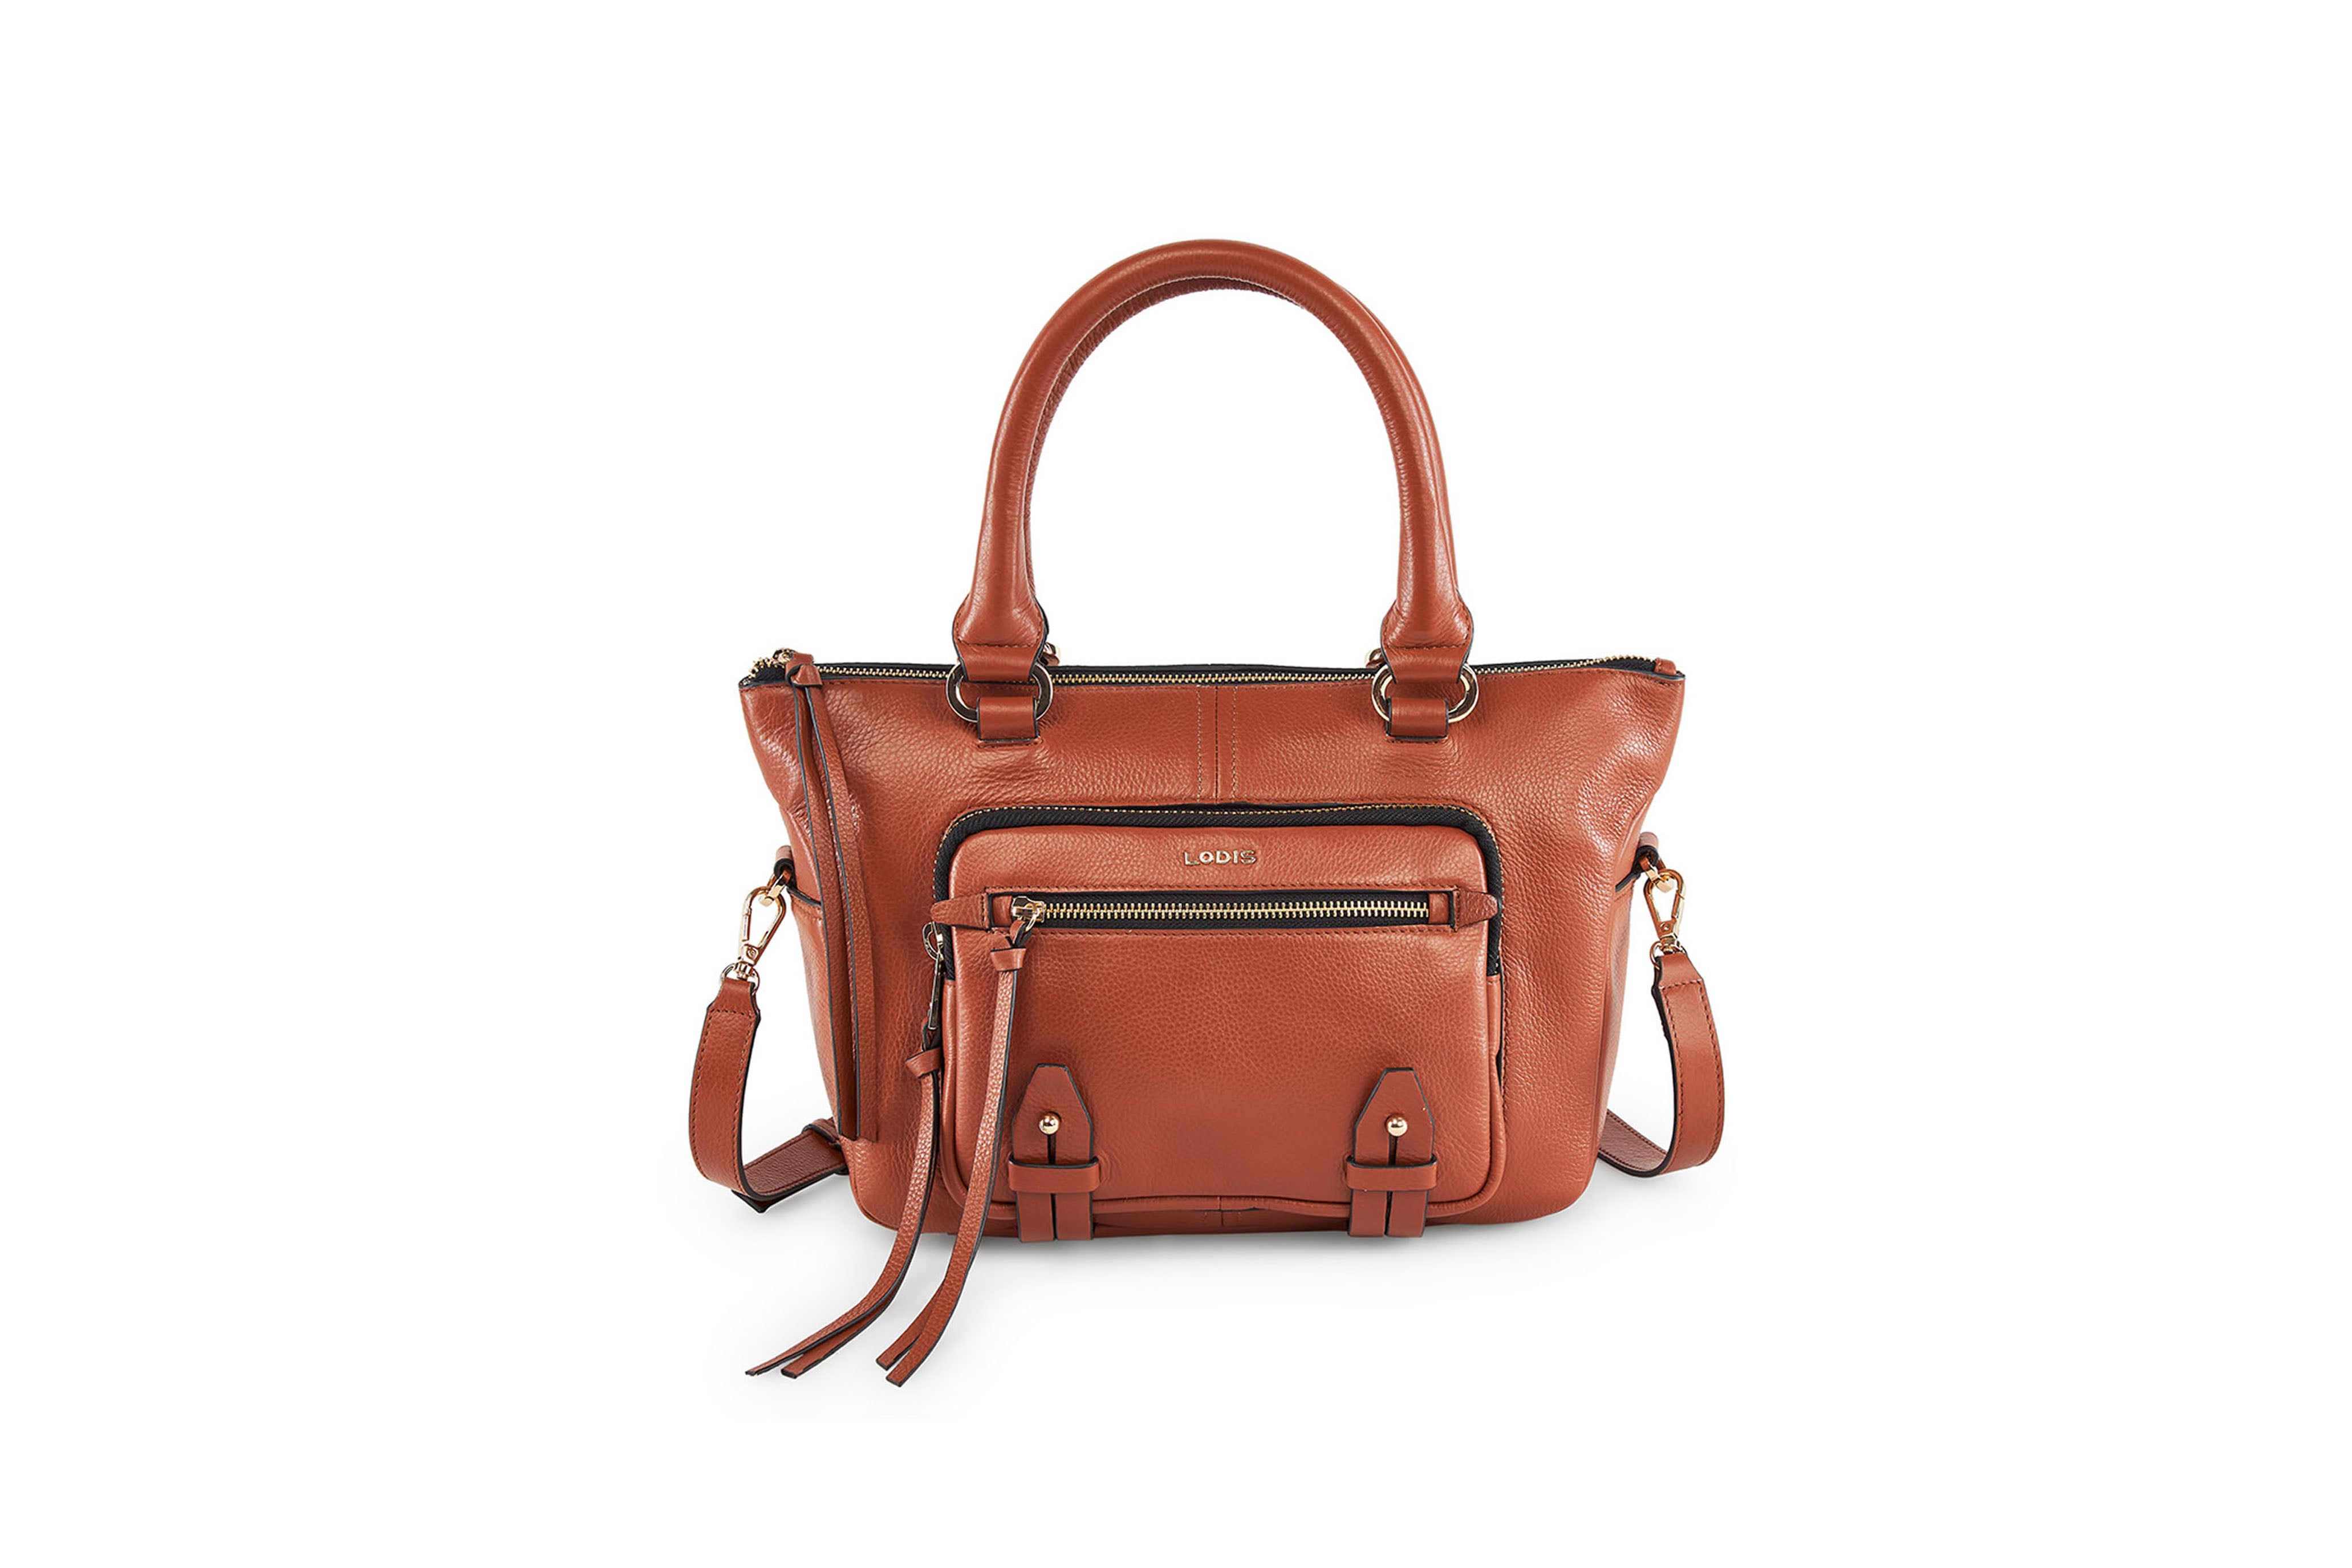 Shop Now & Elevate Your Style with Ellie Satchel | Lodis